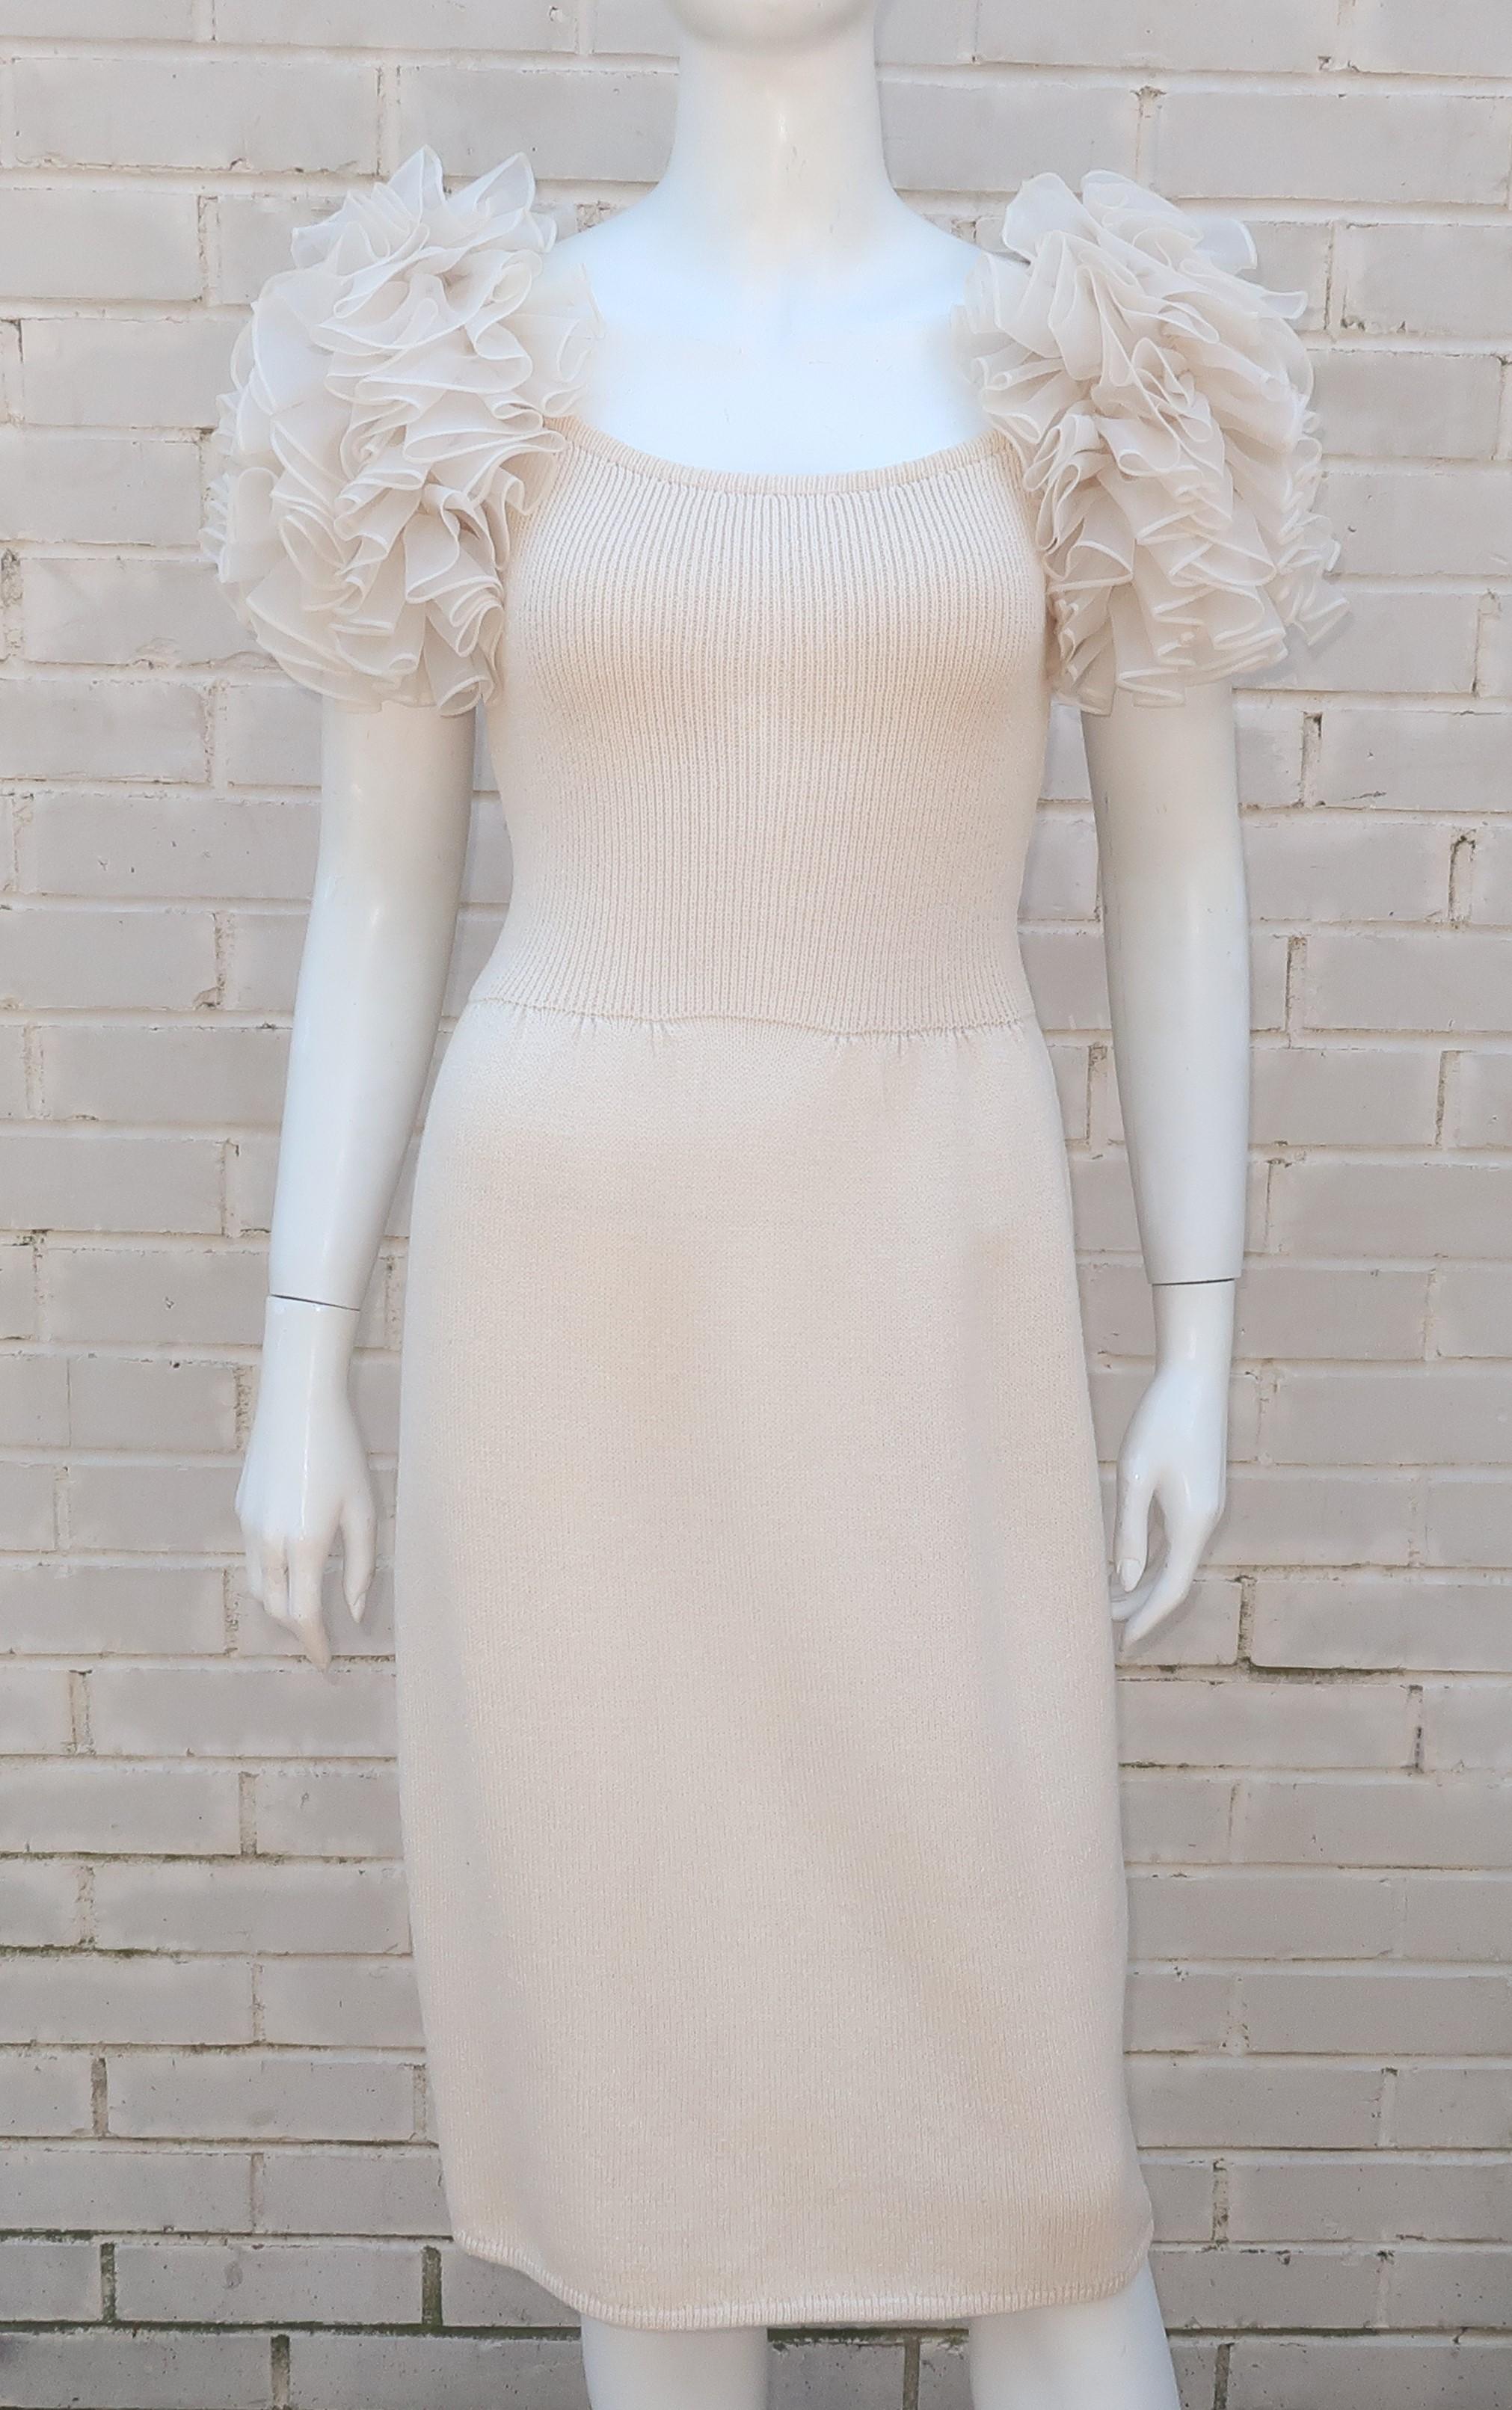 Ivory White Knit Cocktail Dress With Ruffled Sleeves & Rhinestones, C.1980 7